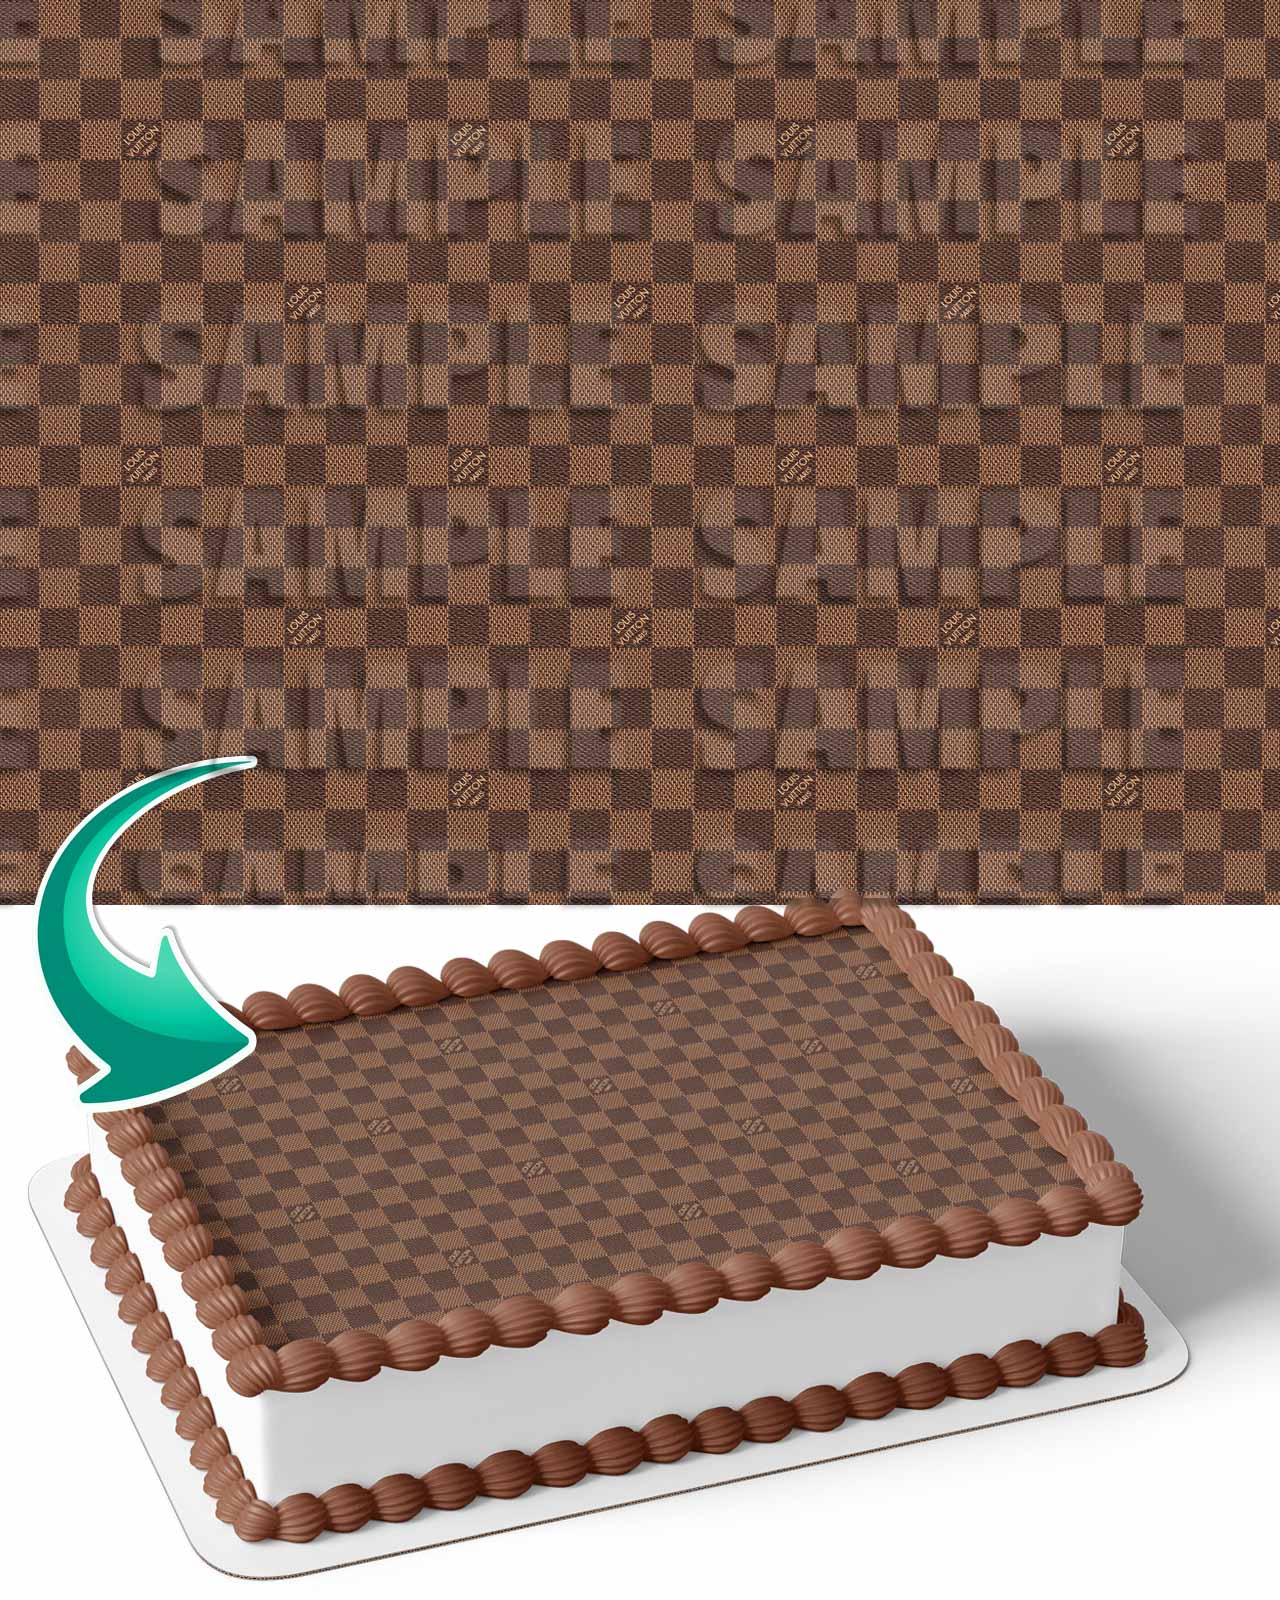 Louis Vuitton Checkerboard Neverfull Damier Edible Image Cake Topper  Personalized Birthday Sheet Decoration Custom Party Frosting Transfer  Fondant